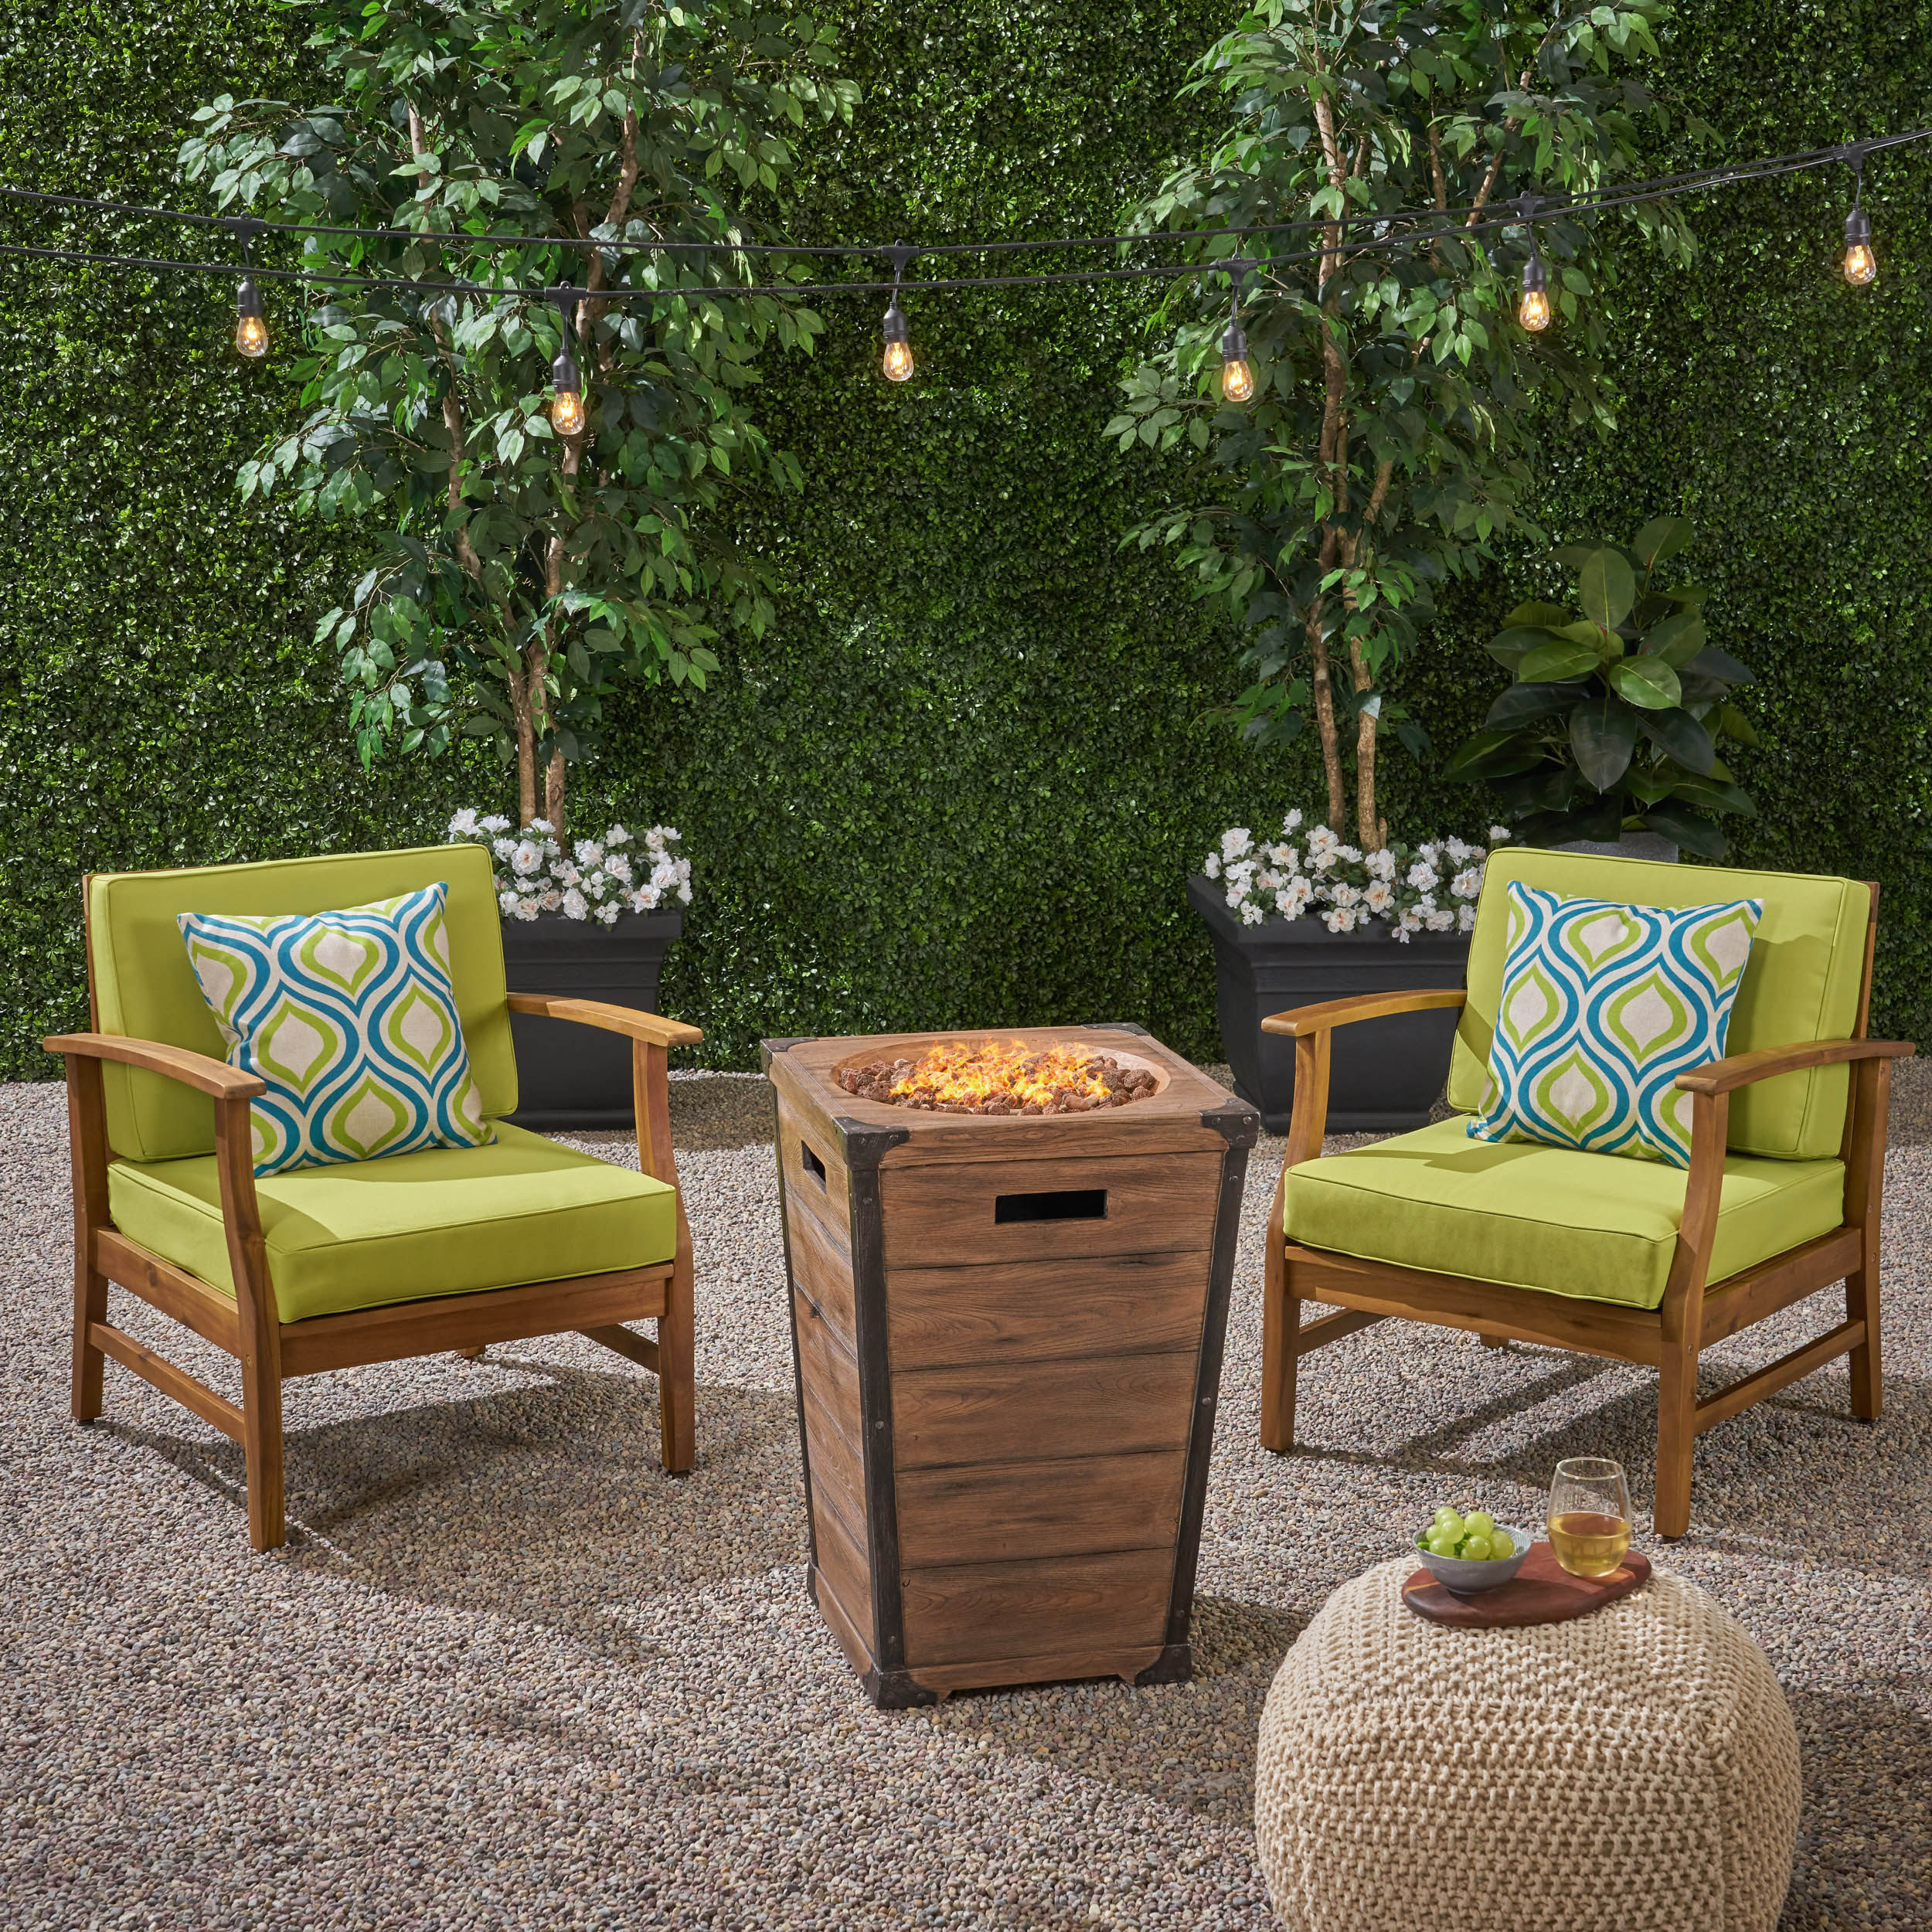 Capri Outdoor 2 Piece Acacia Wood Club Chair Set with Fire Column - image 2 of 9